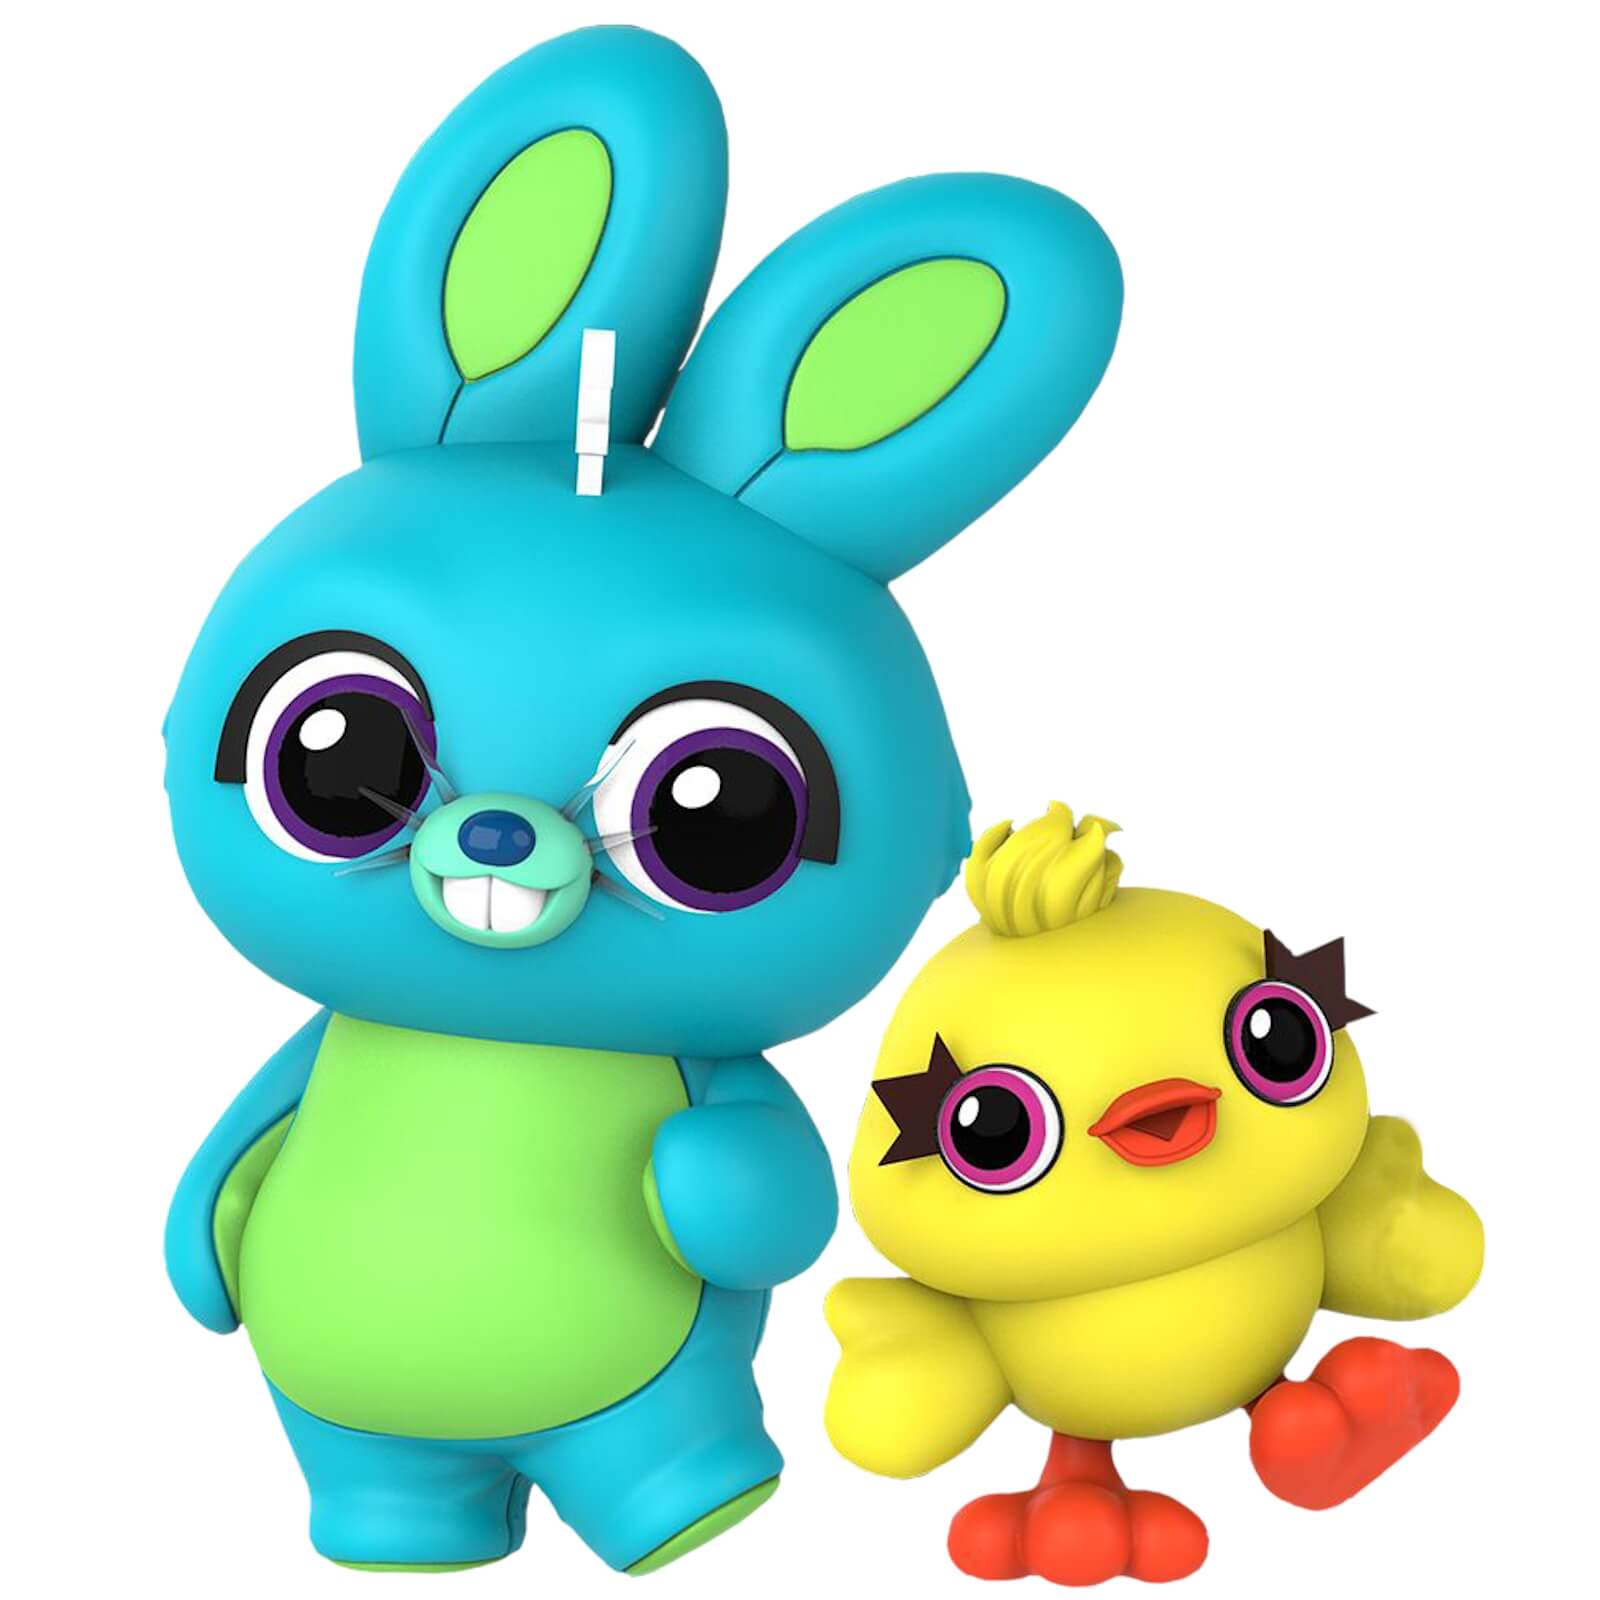 bunny and ducky from toy story 4